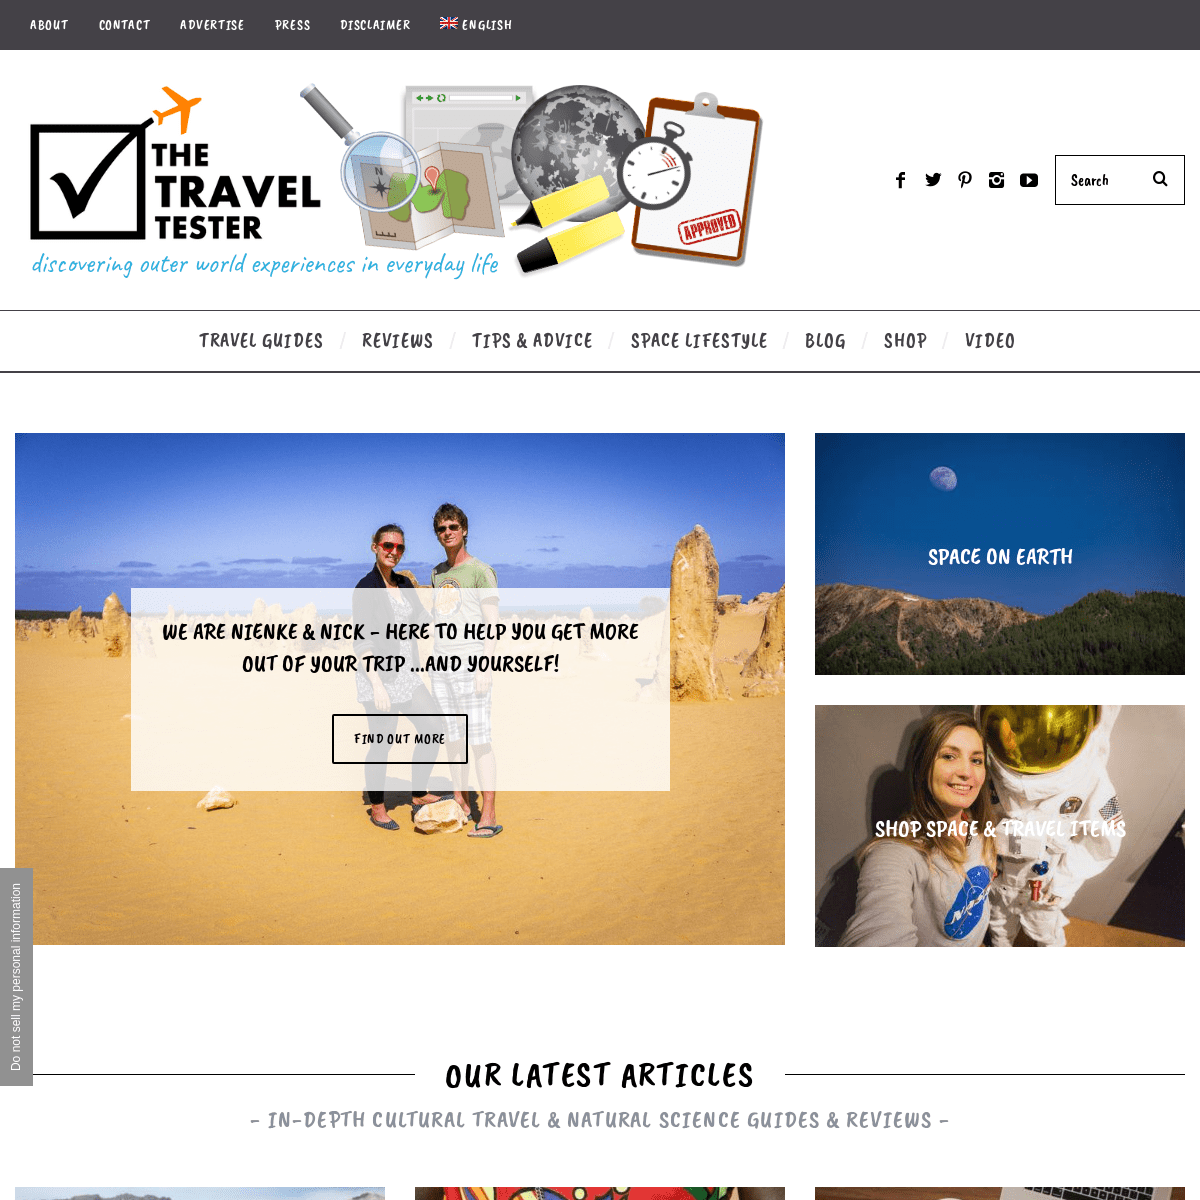 A complete backup of thetraveltester.com